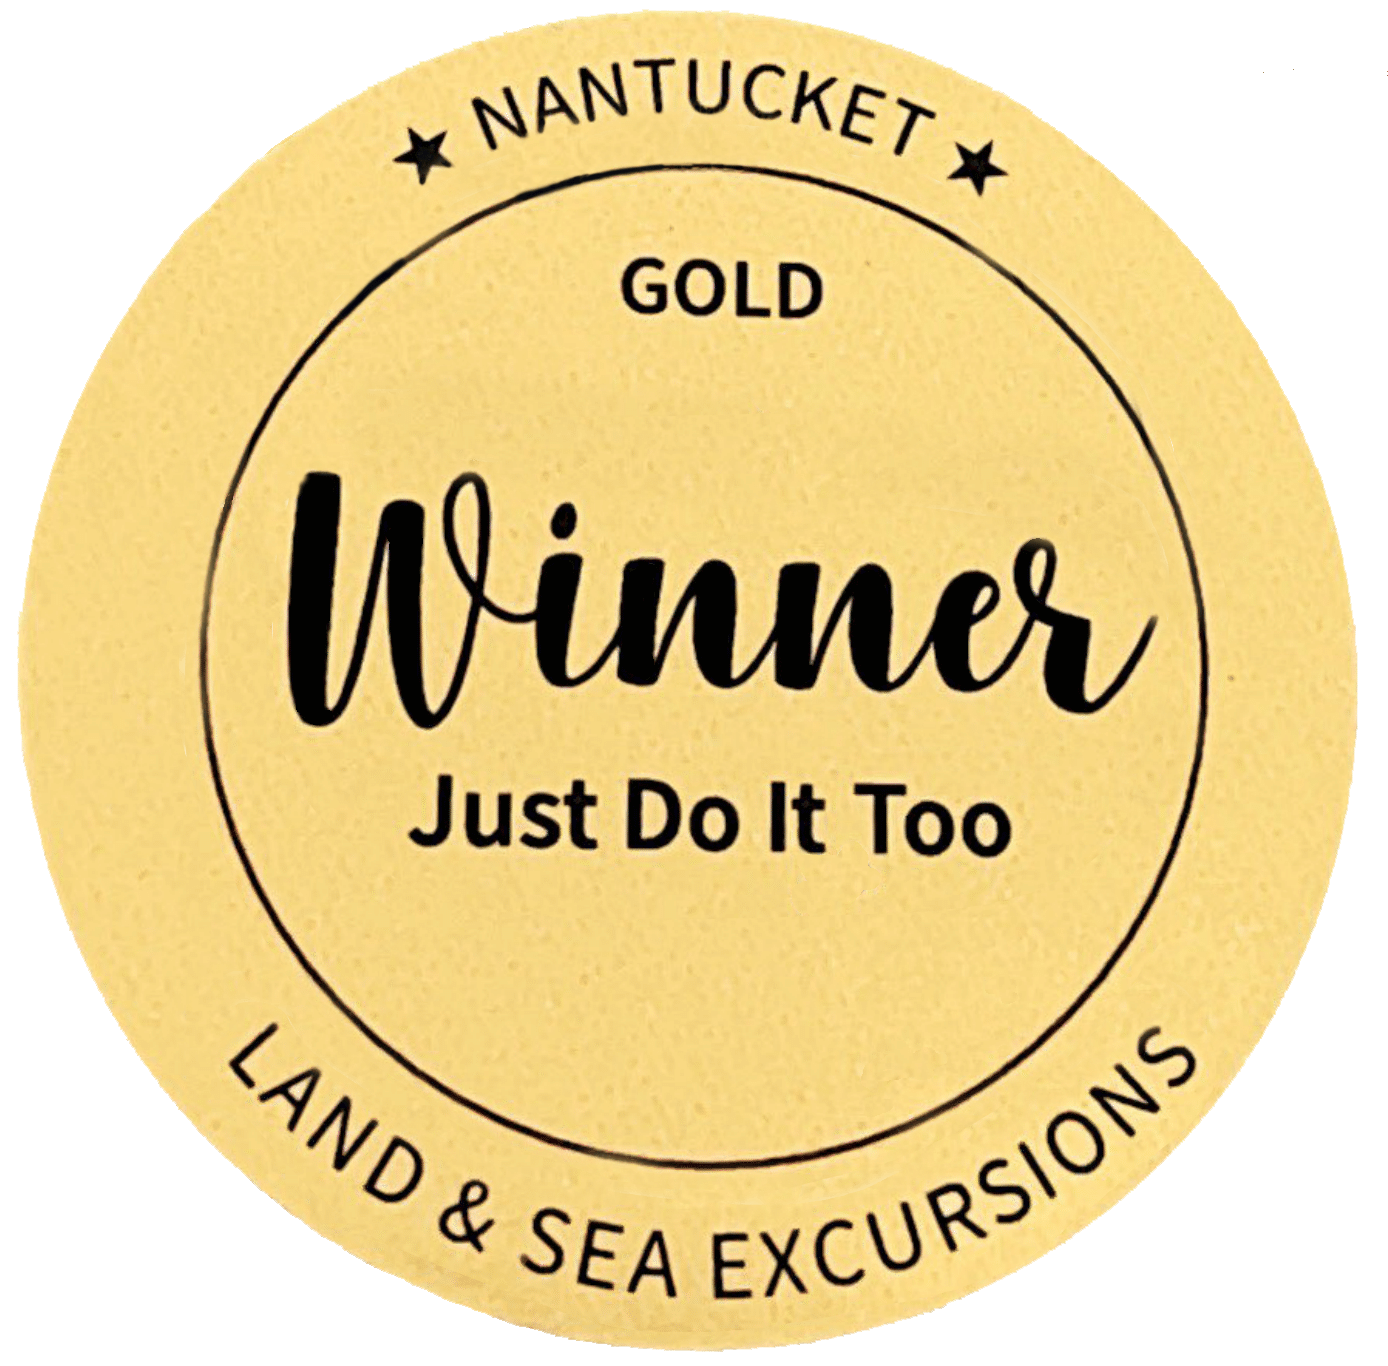 Best Land and Sea Excursion Gold Cape Cod Life Magazine